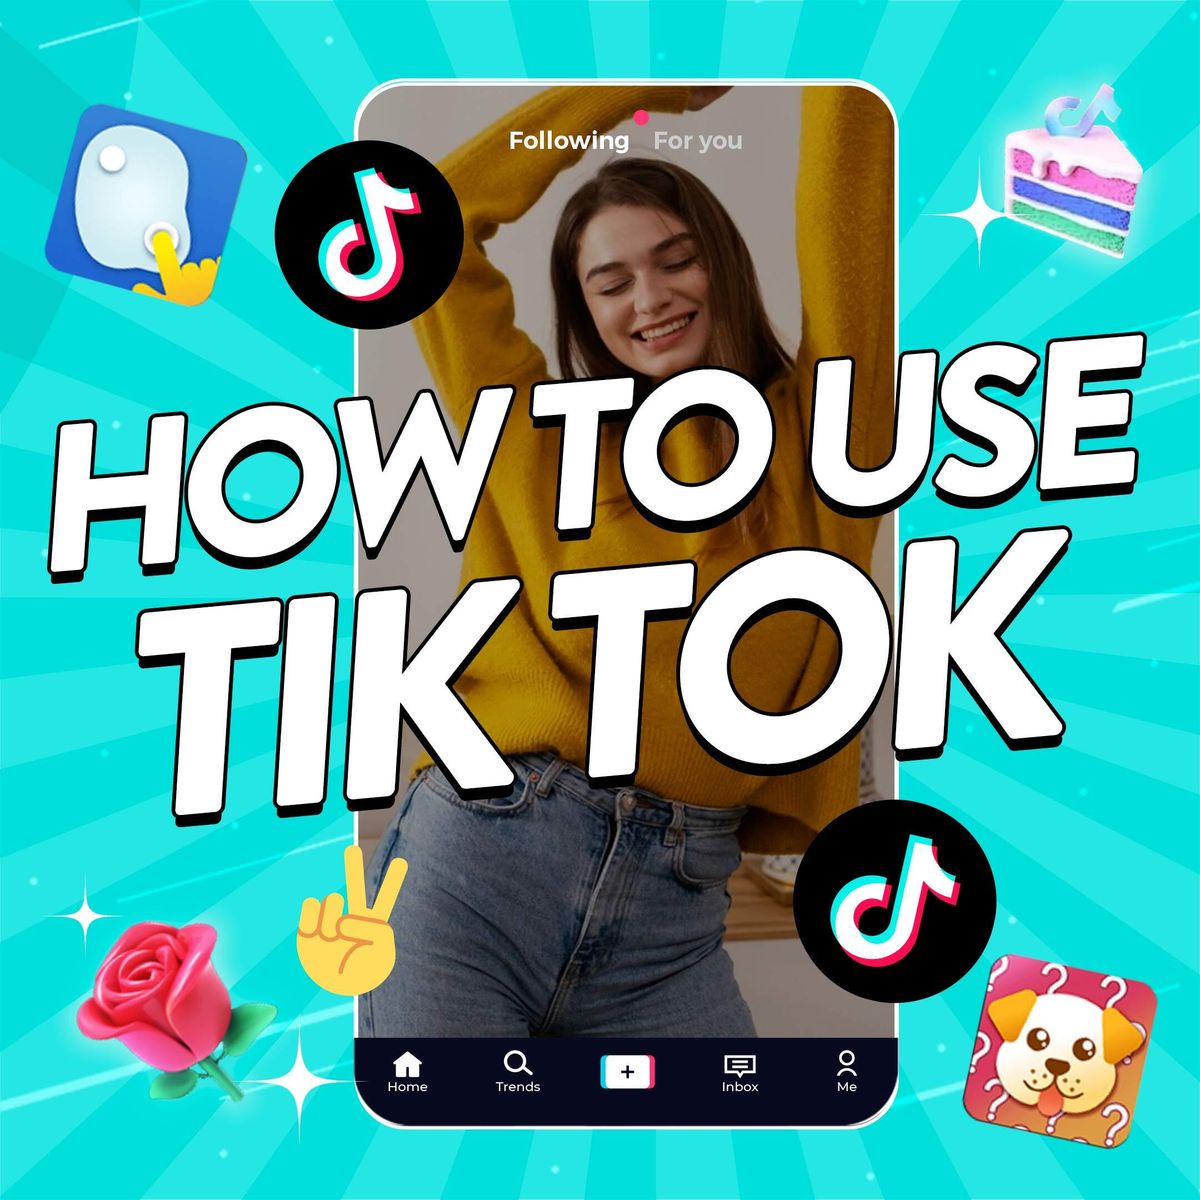 Image of a TikToker in an illustration to accompany article on how to use TikTok.